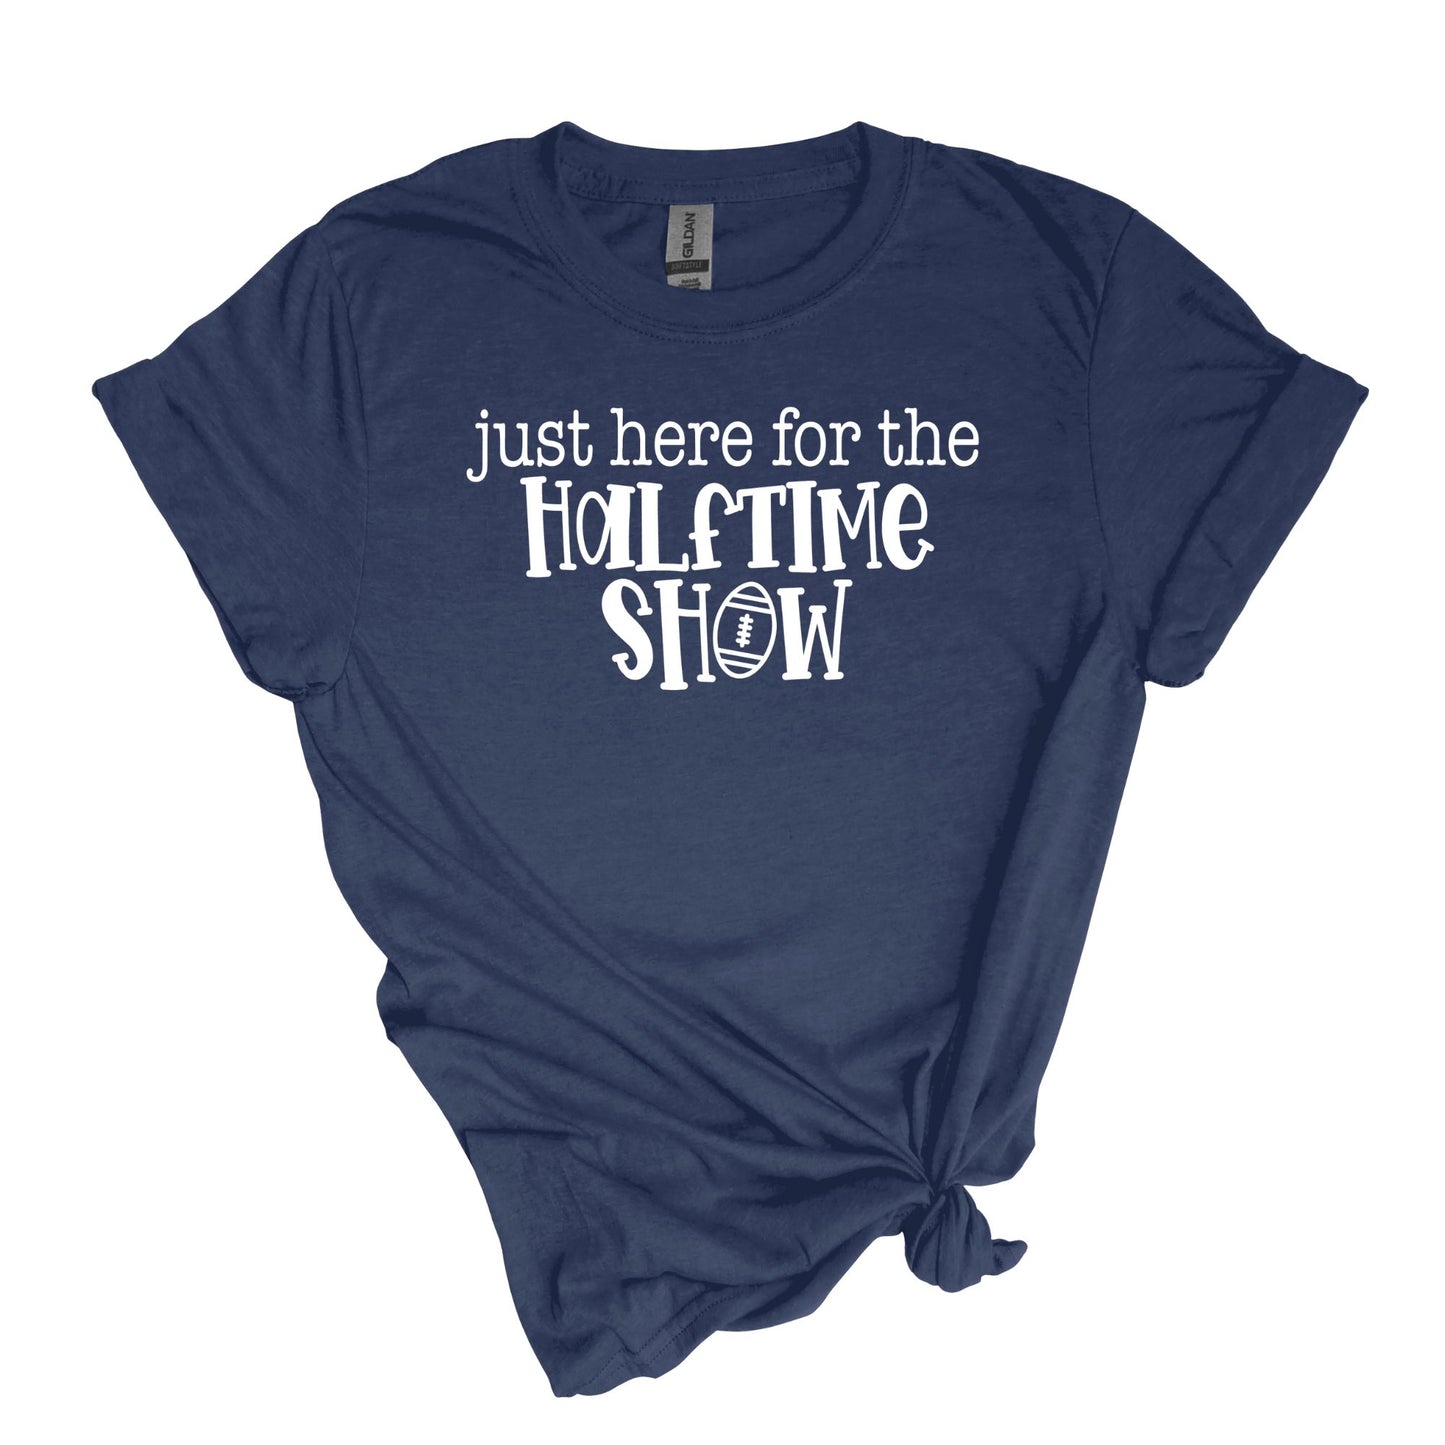 Just here for the halftime show - Fun Football Halftime show Adult Soft-style T-shirt for those who are just there for the halftime show.